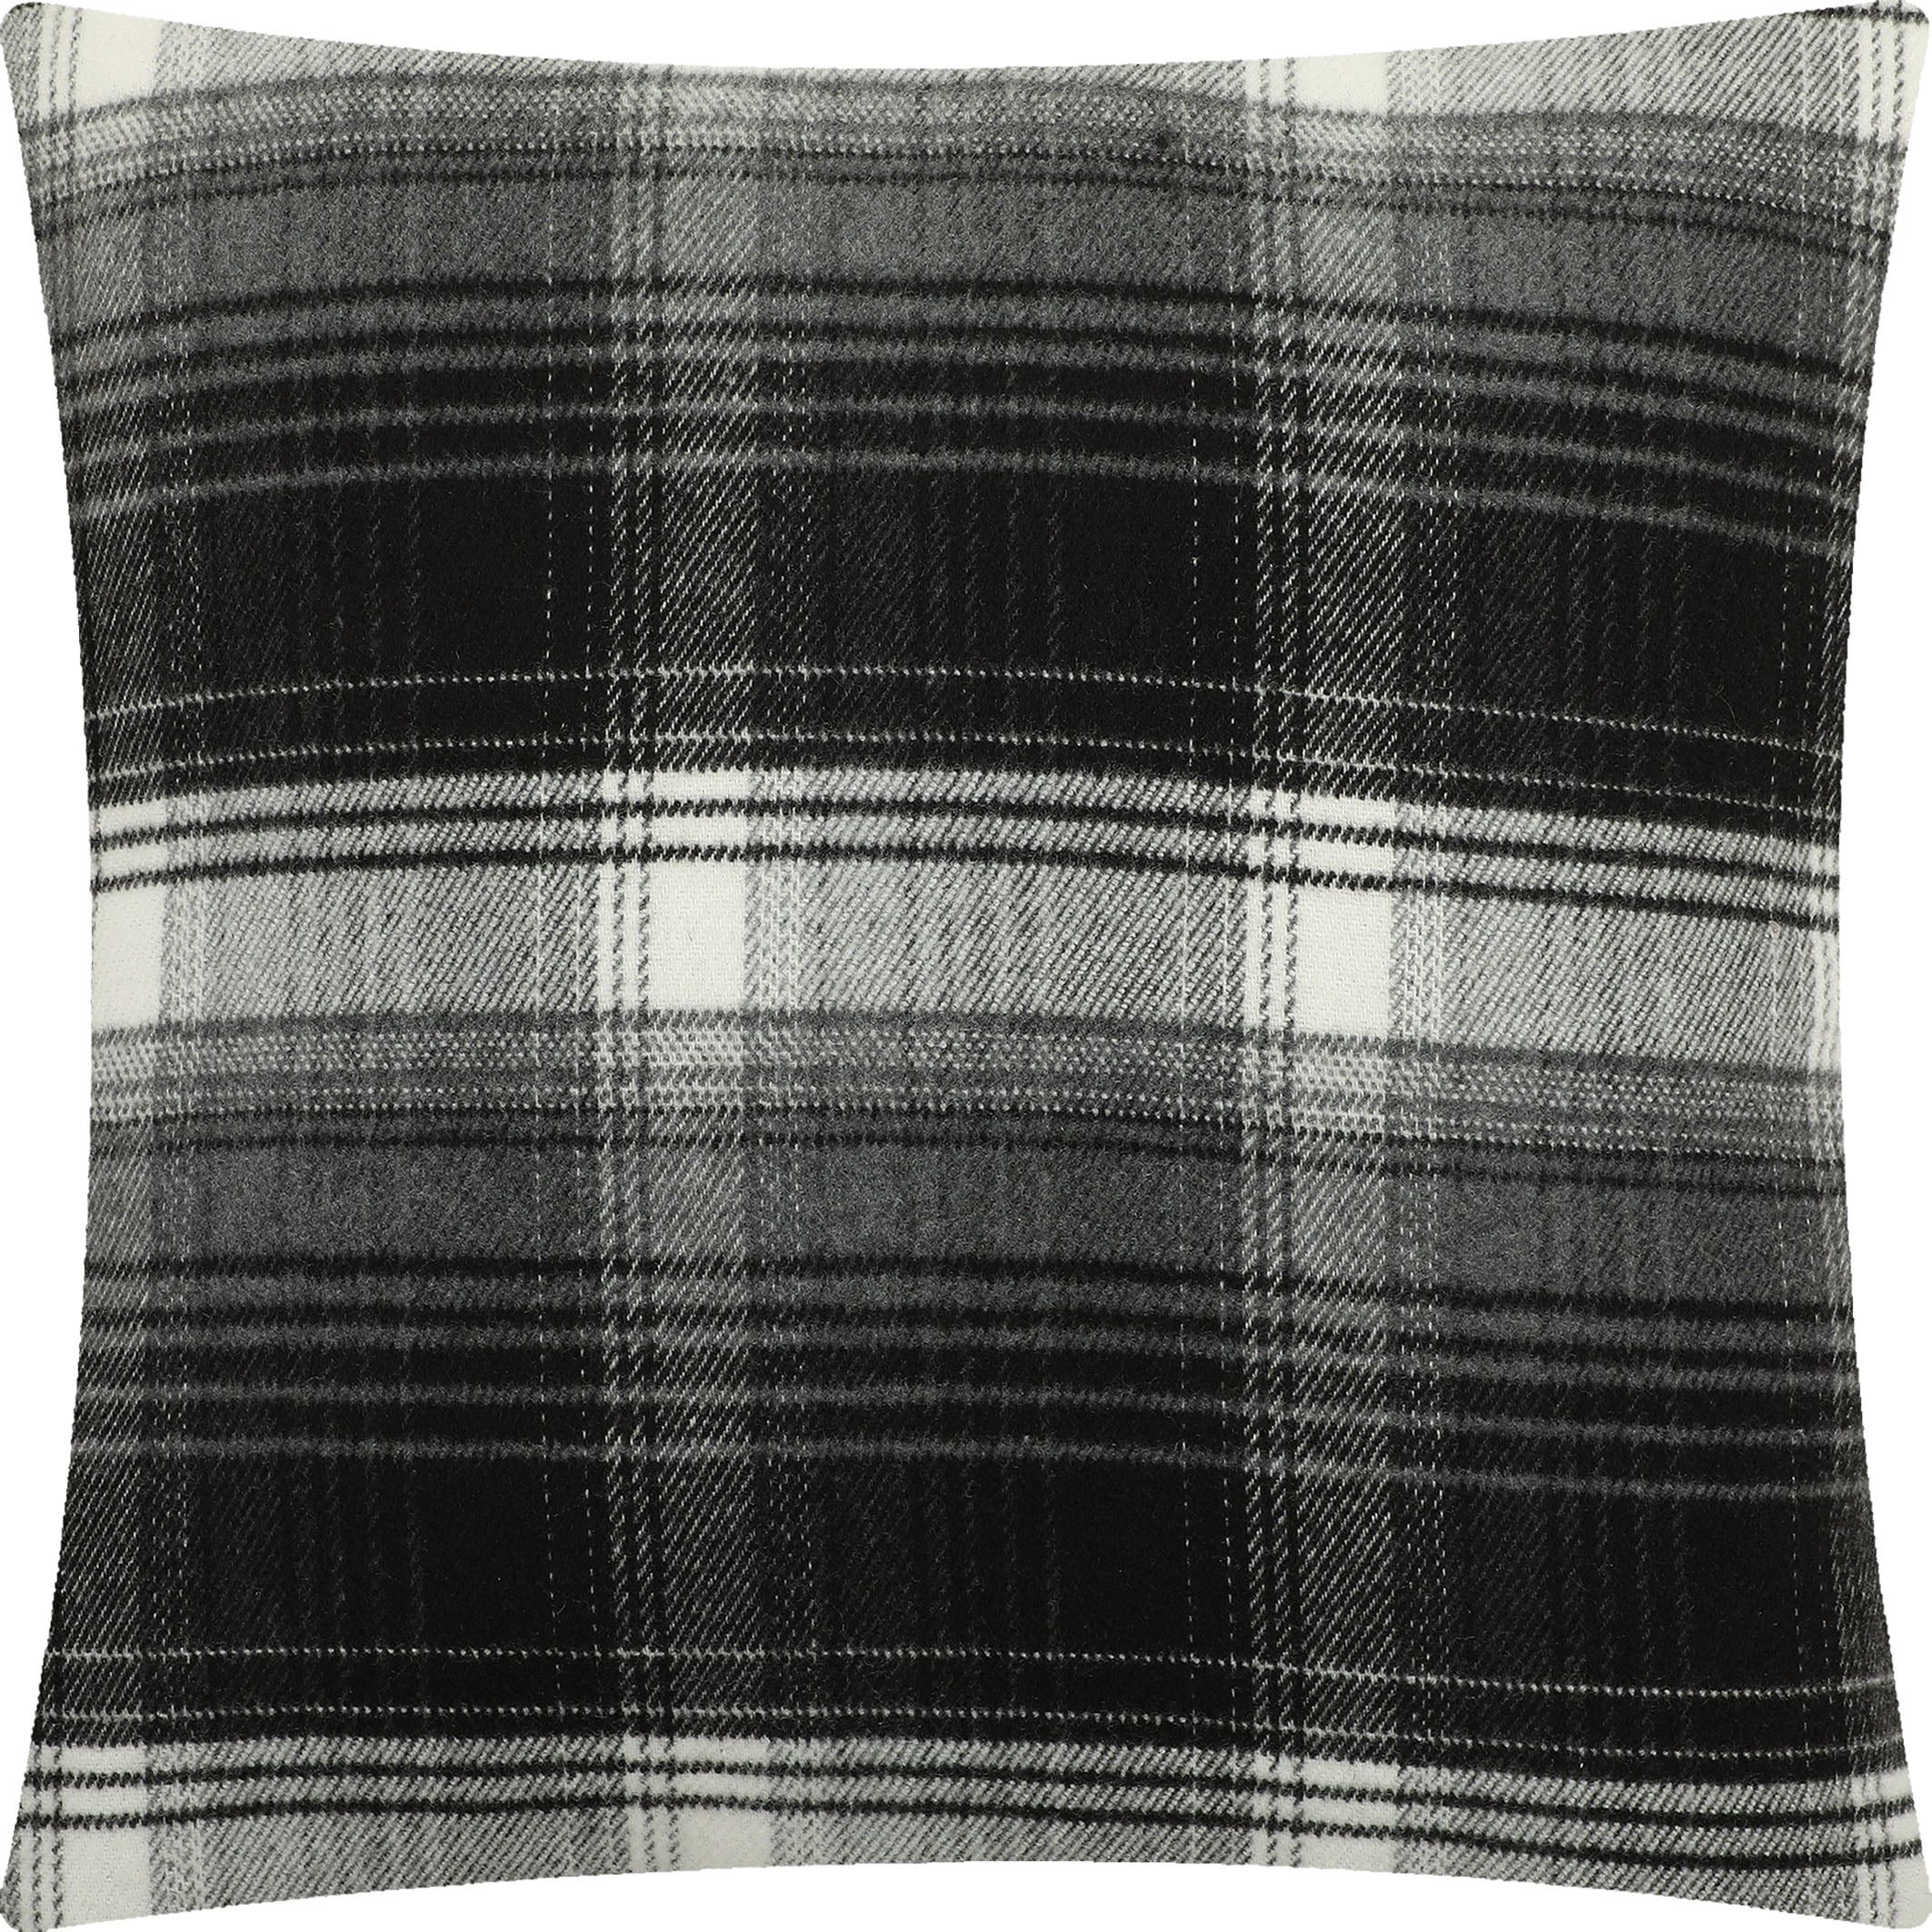 Mainstays Plaid Opp Decorative Throw Pillow, Square, 1PC Per Pack, 18"x18", White and Balck